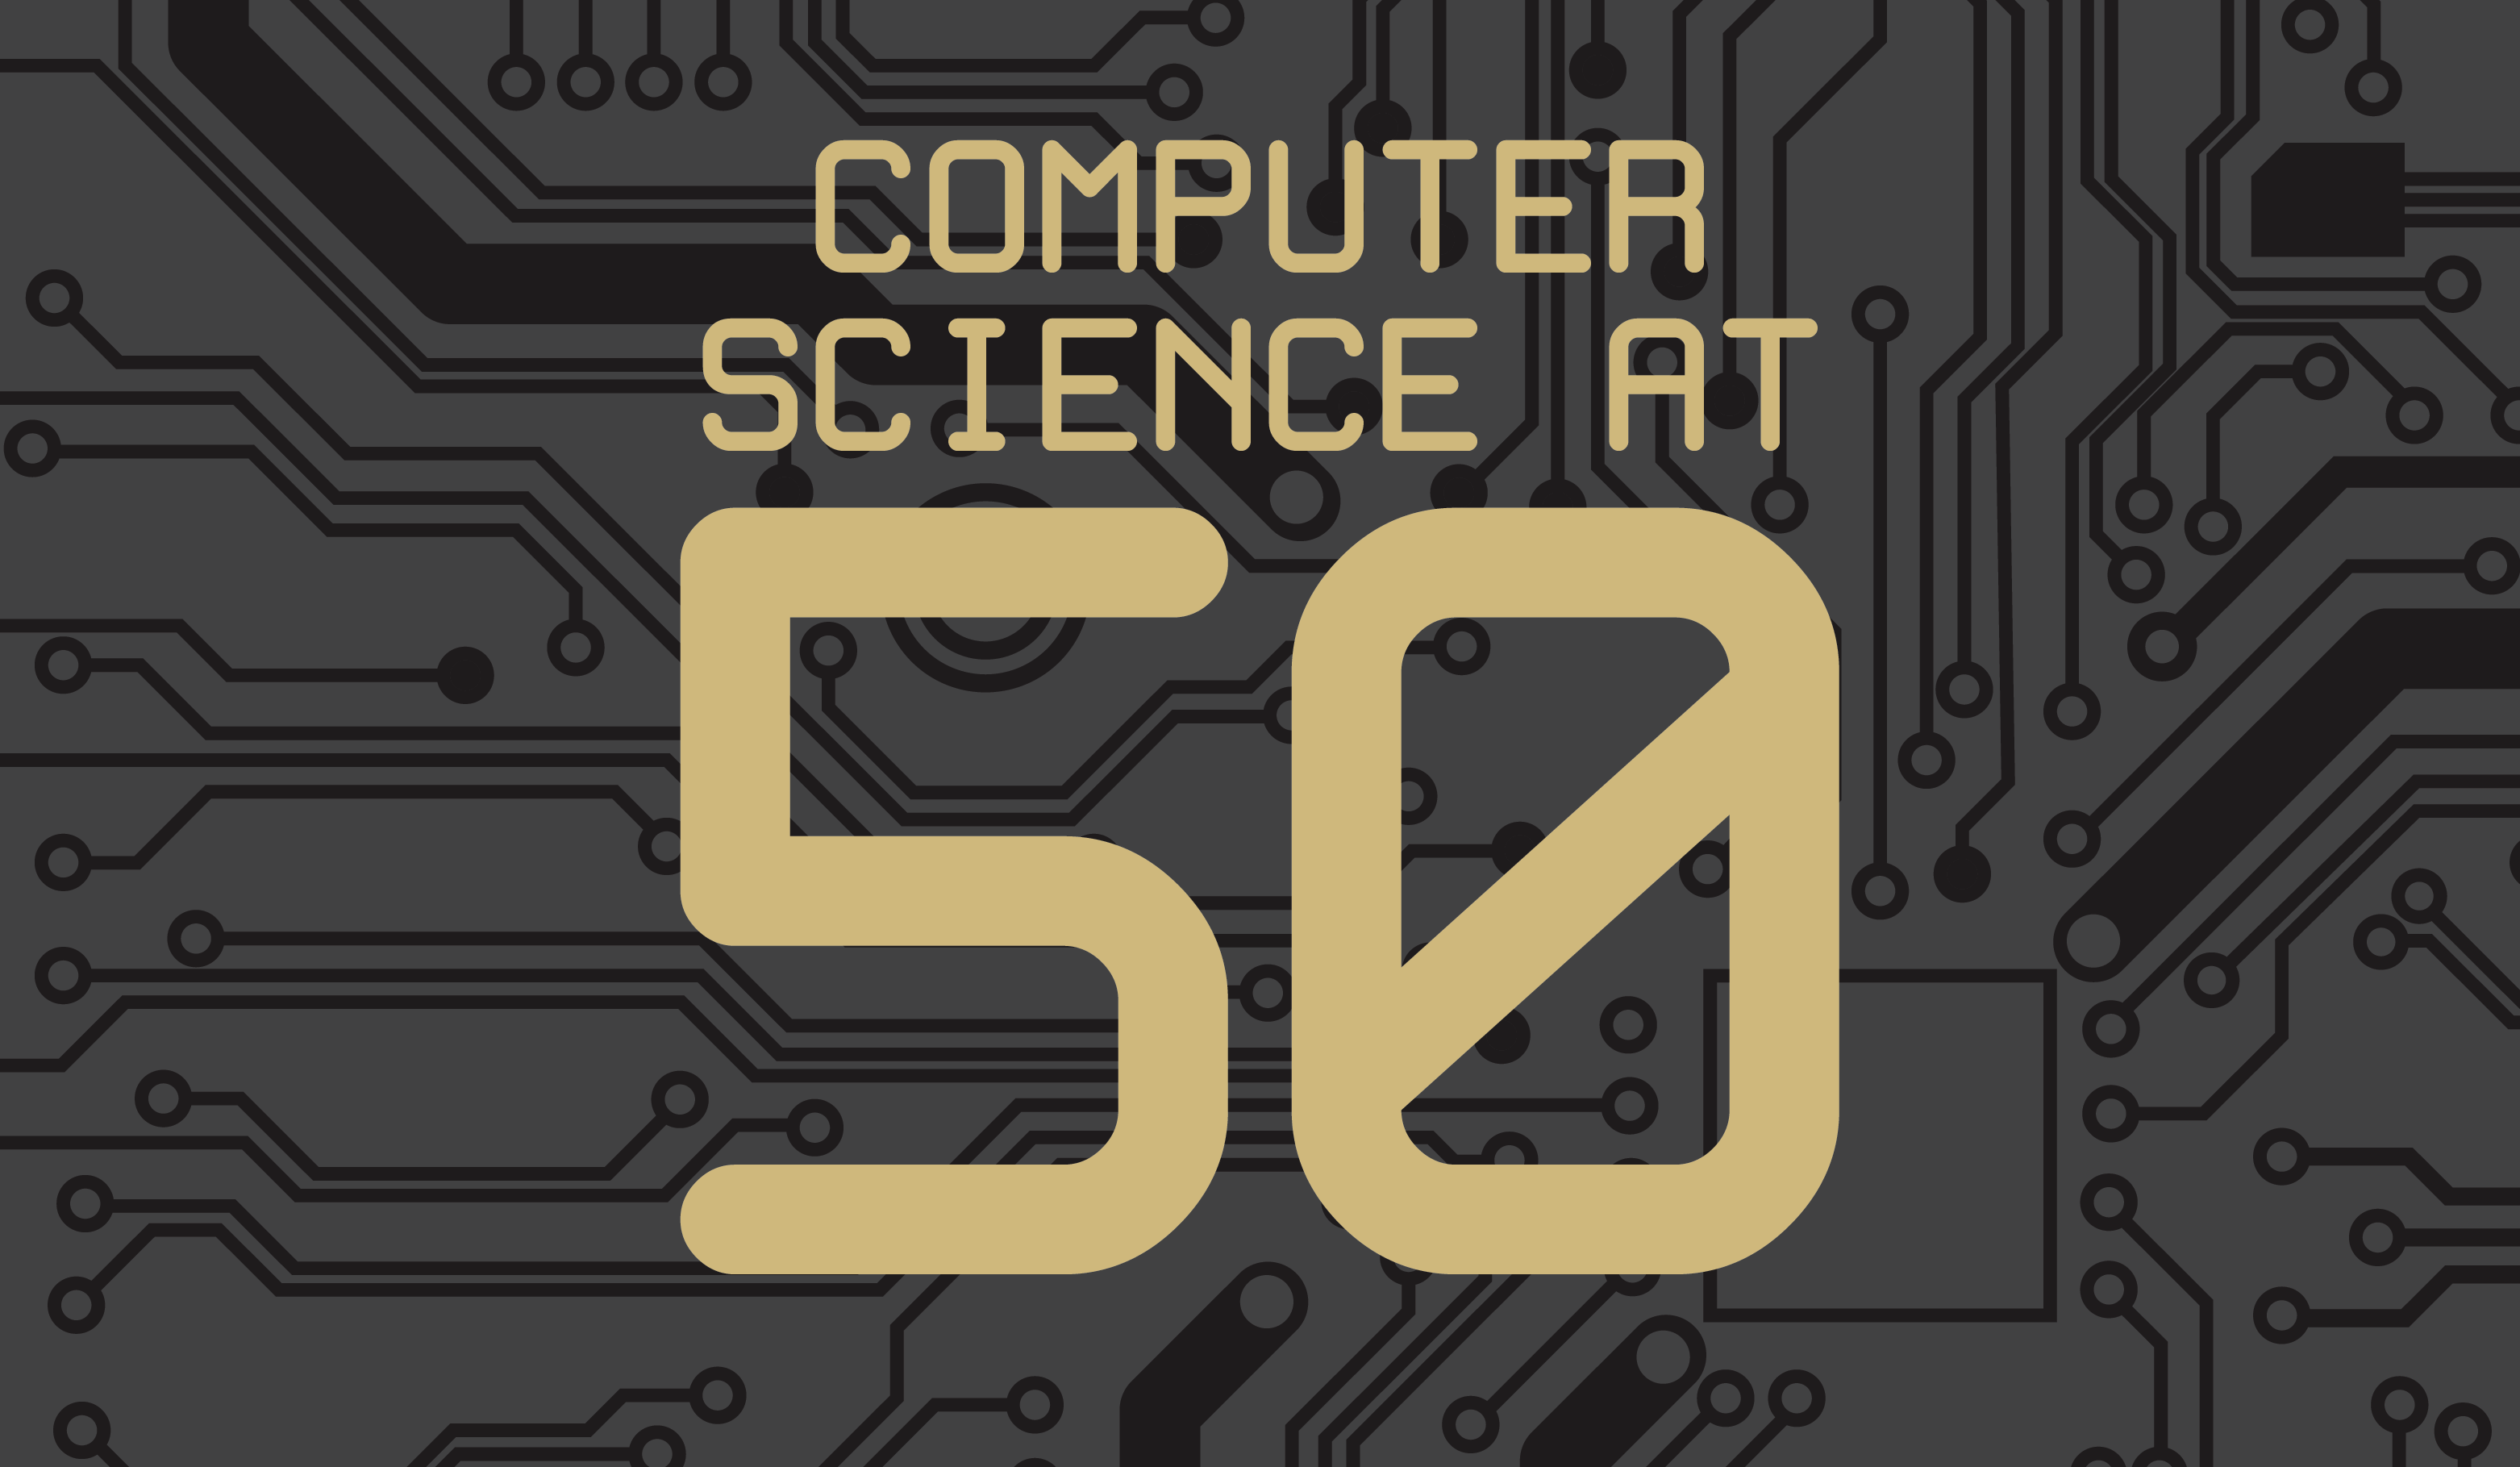 Computer Science at 50 graphic